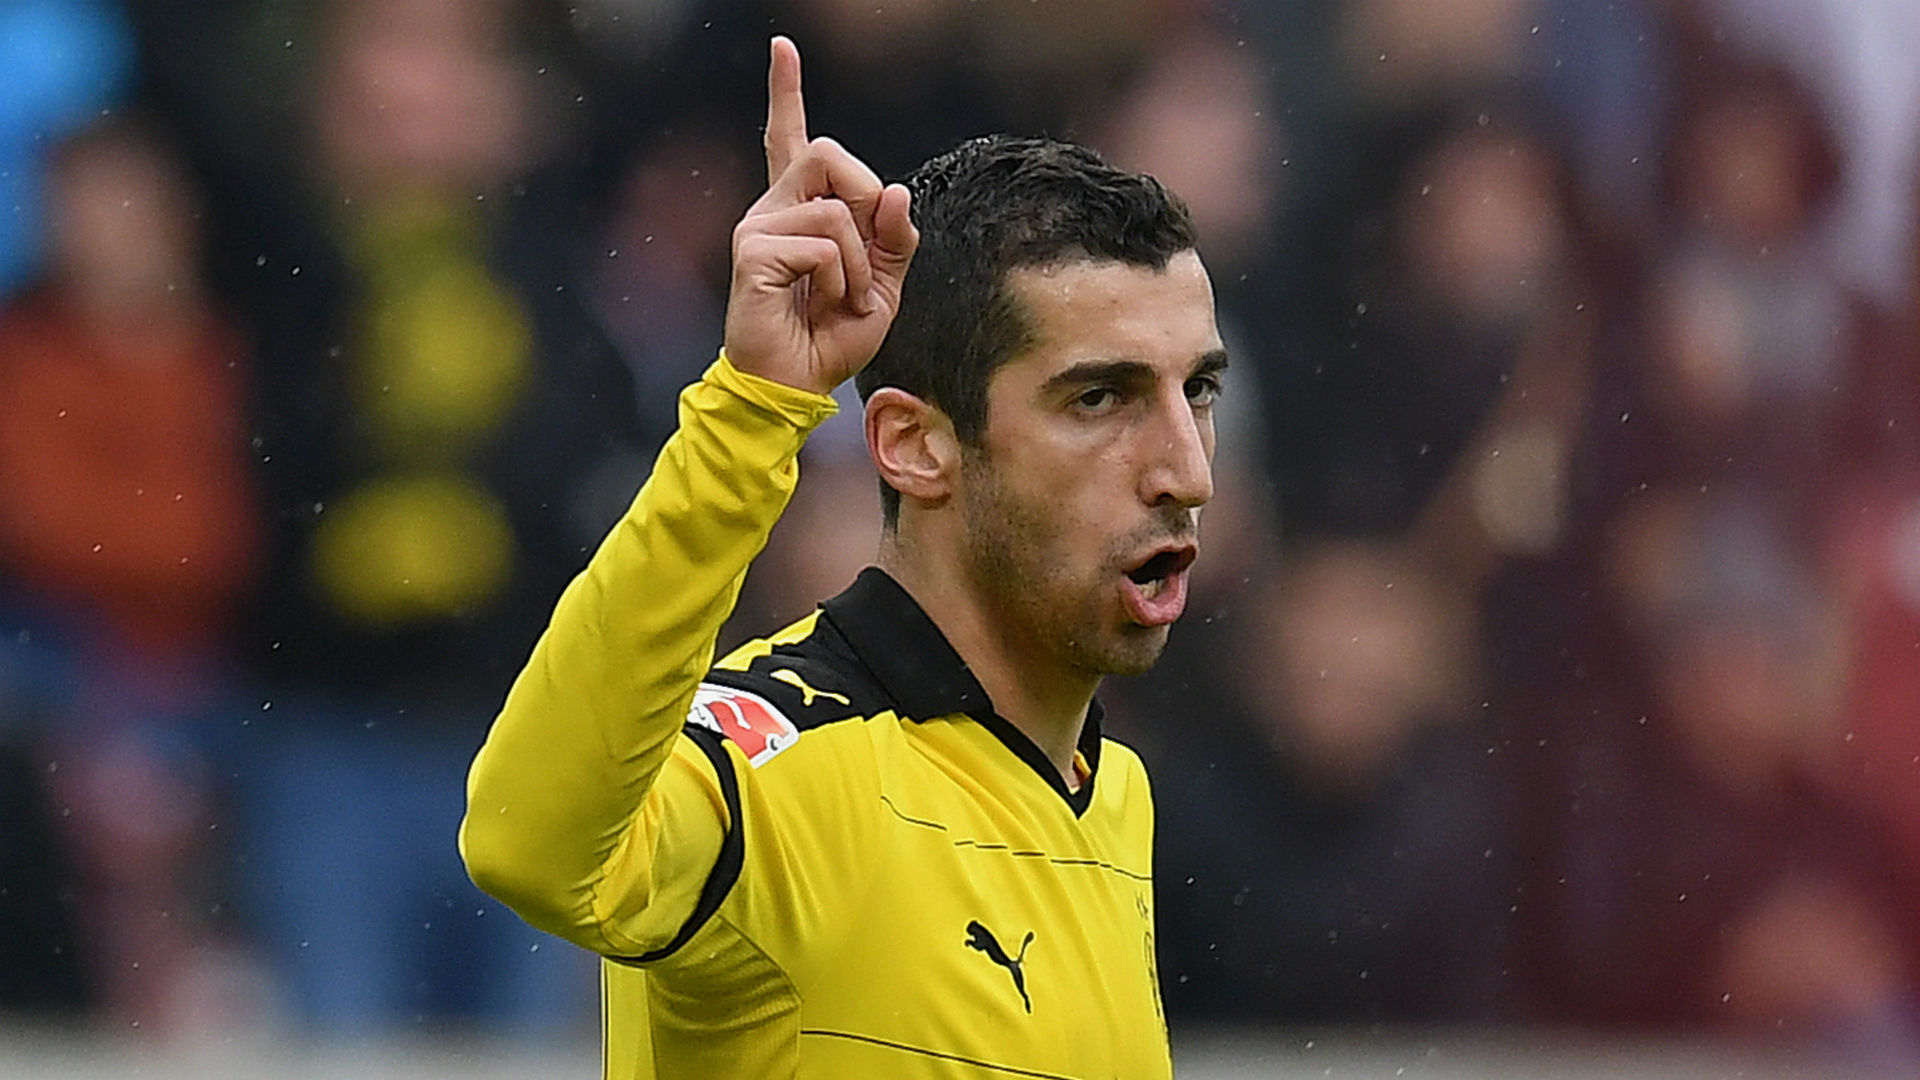 Mkhitaryan: Manchester United not giving up on Premier League